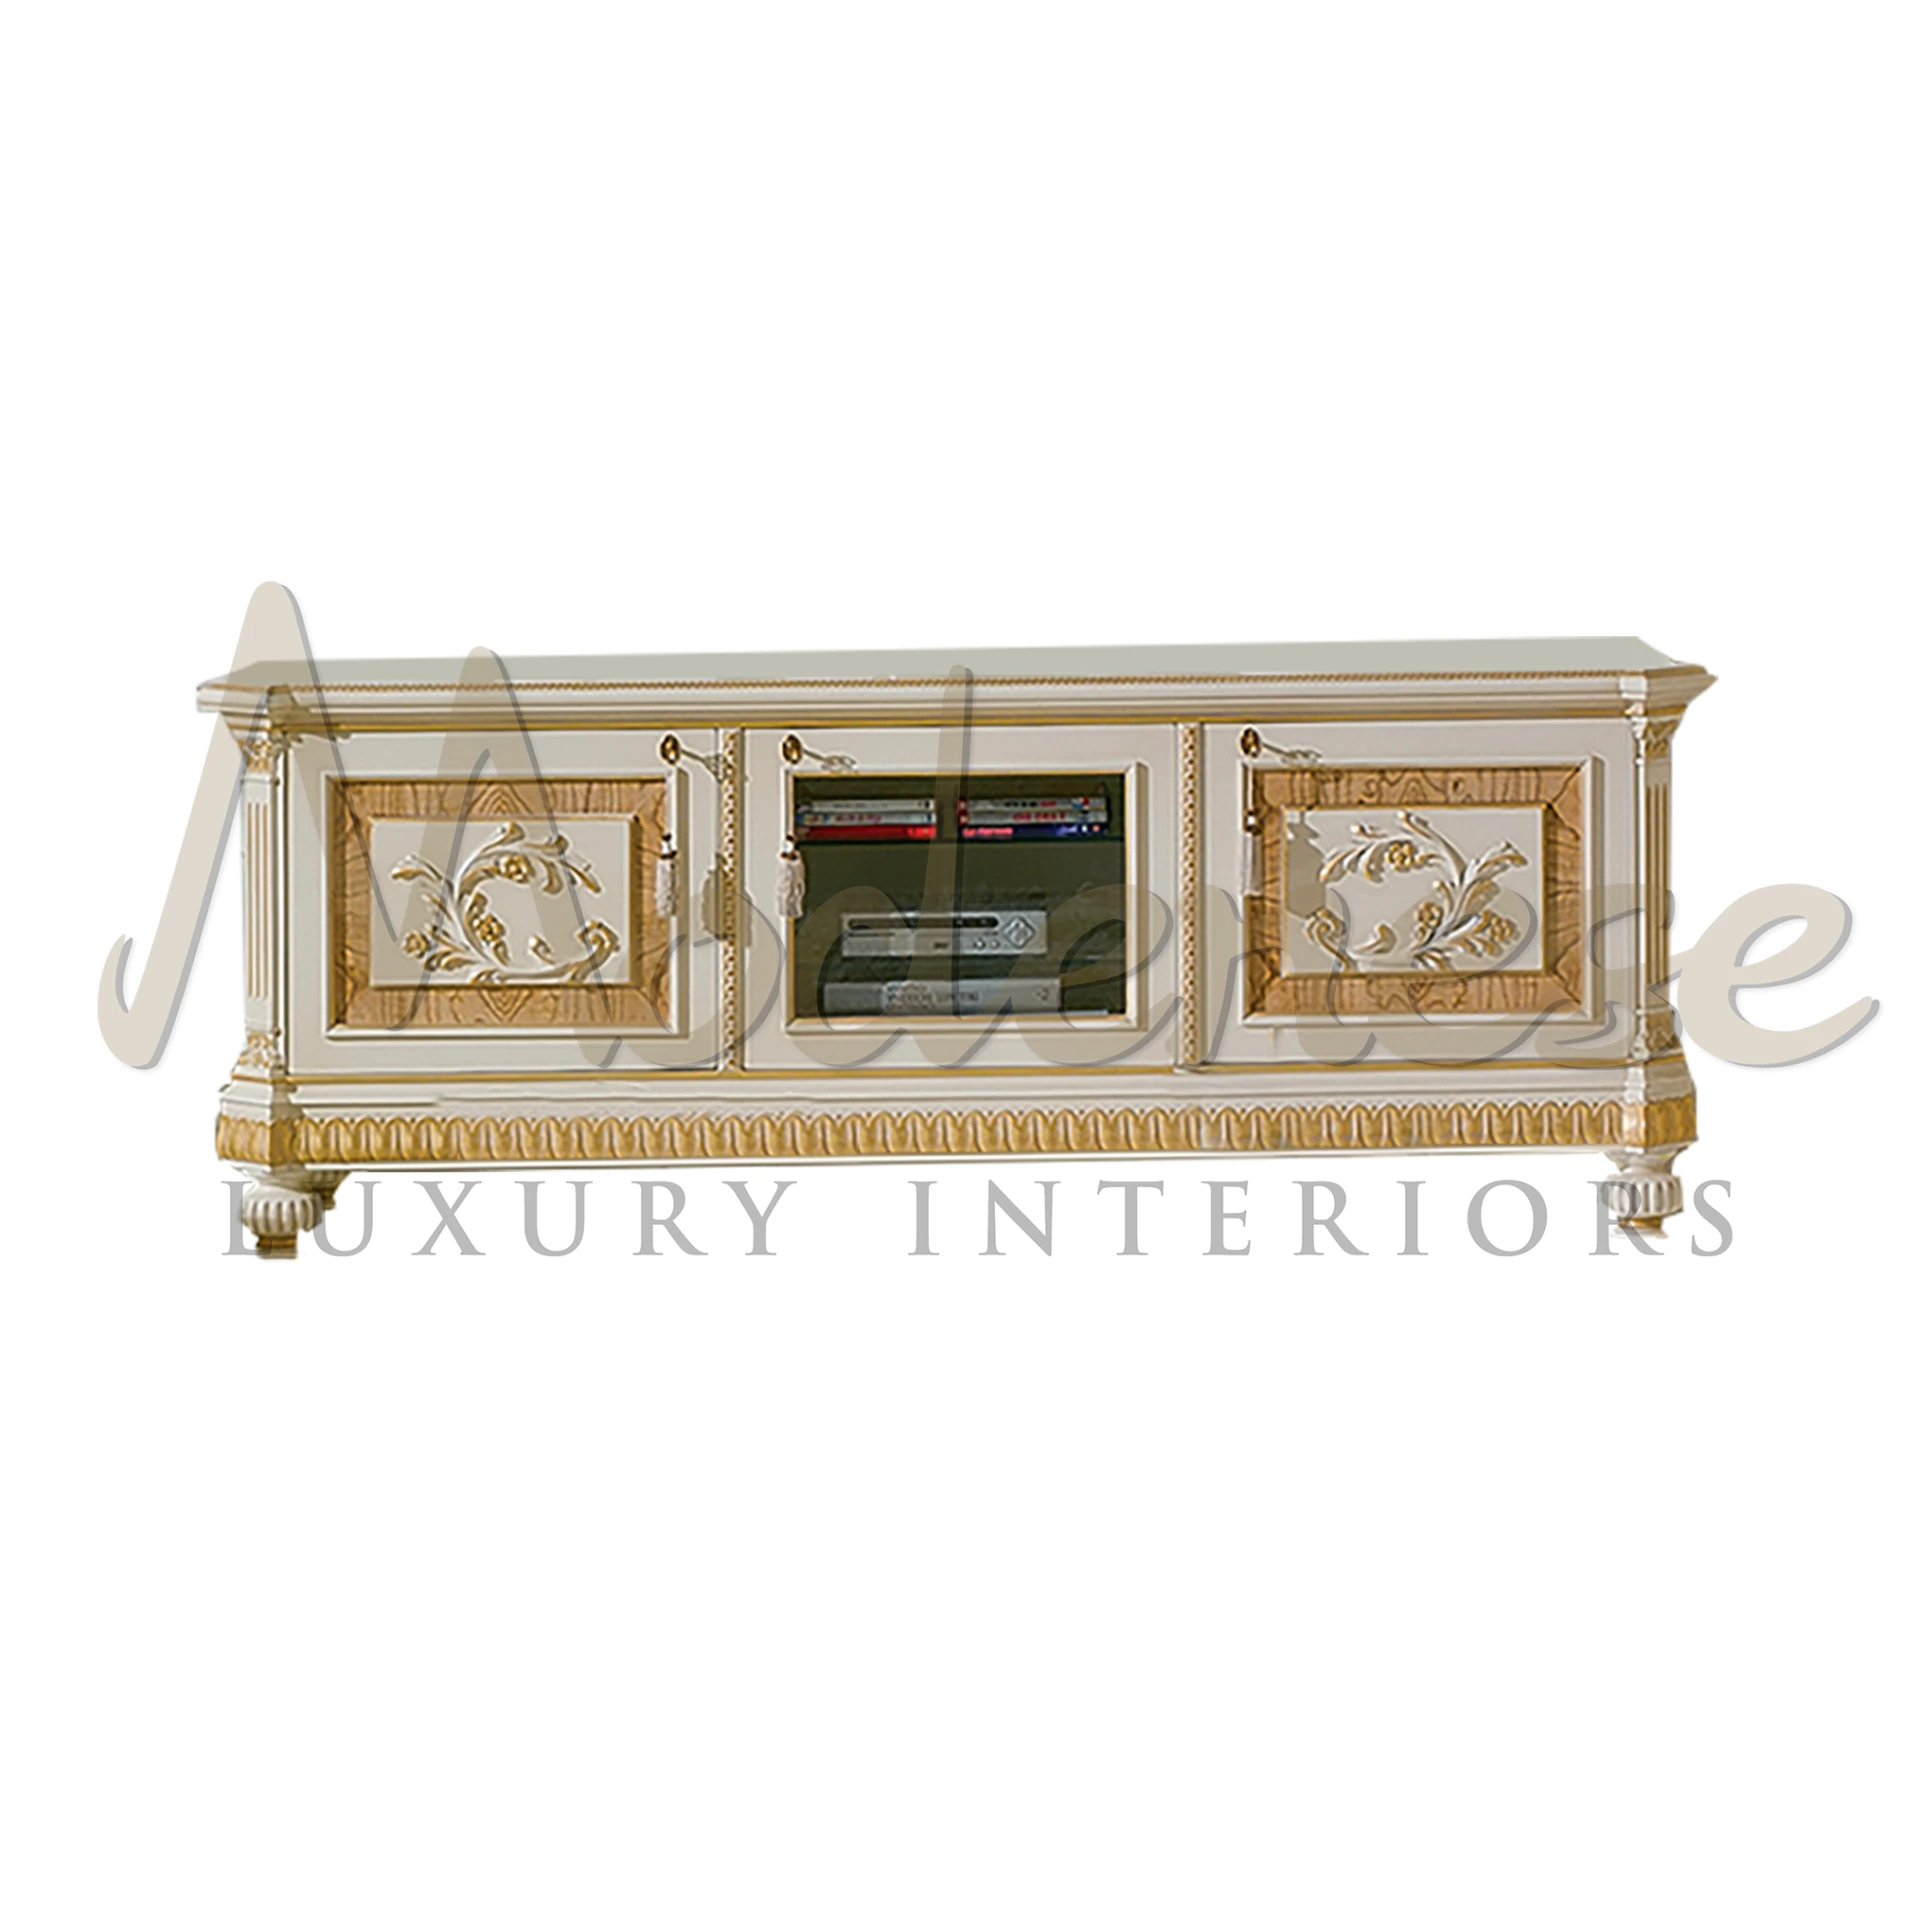 Classic White Finish TV Stand, luxury furniture for timeless elegance, crafted with exquisite wood carving.
